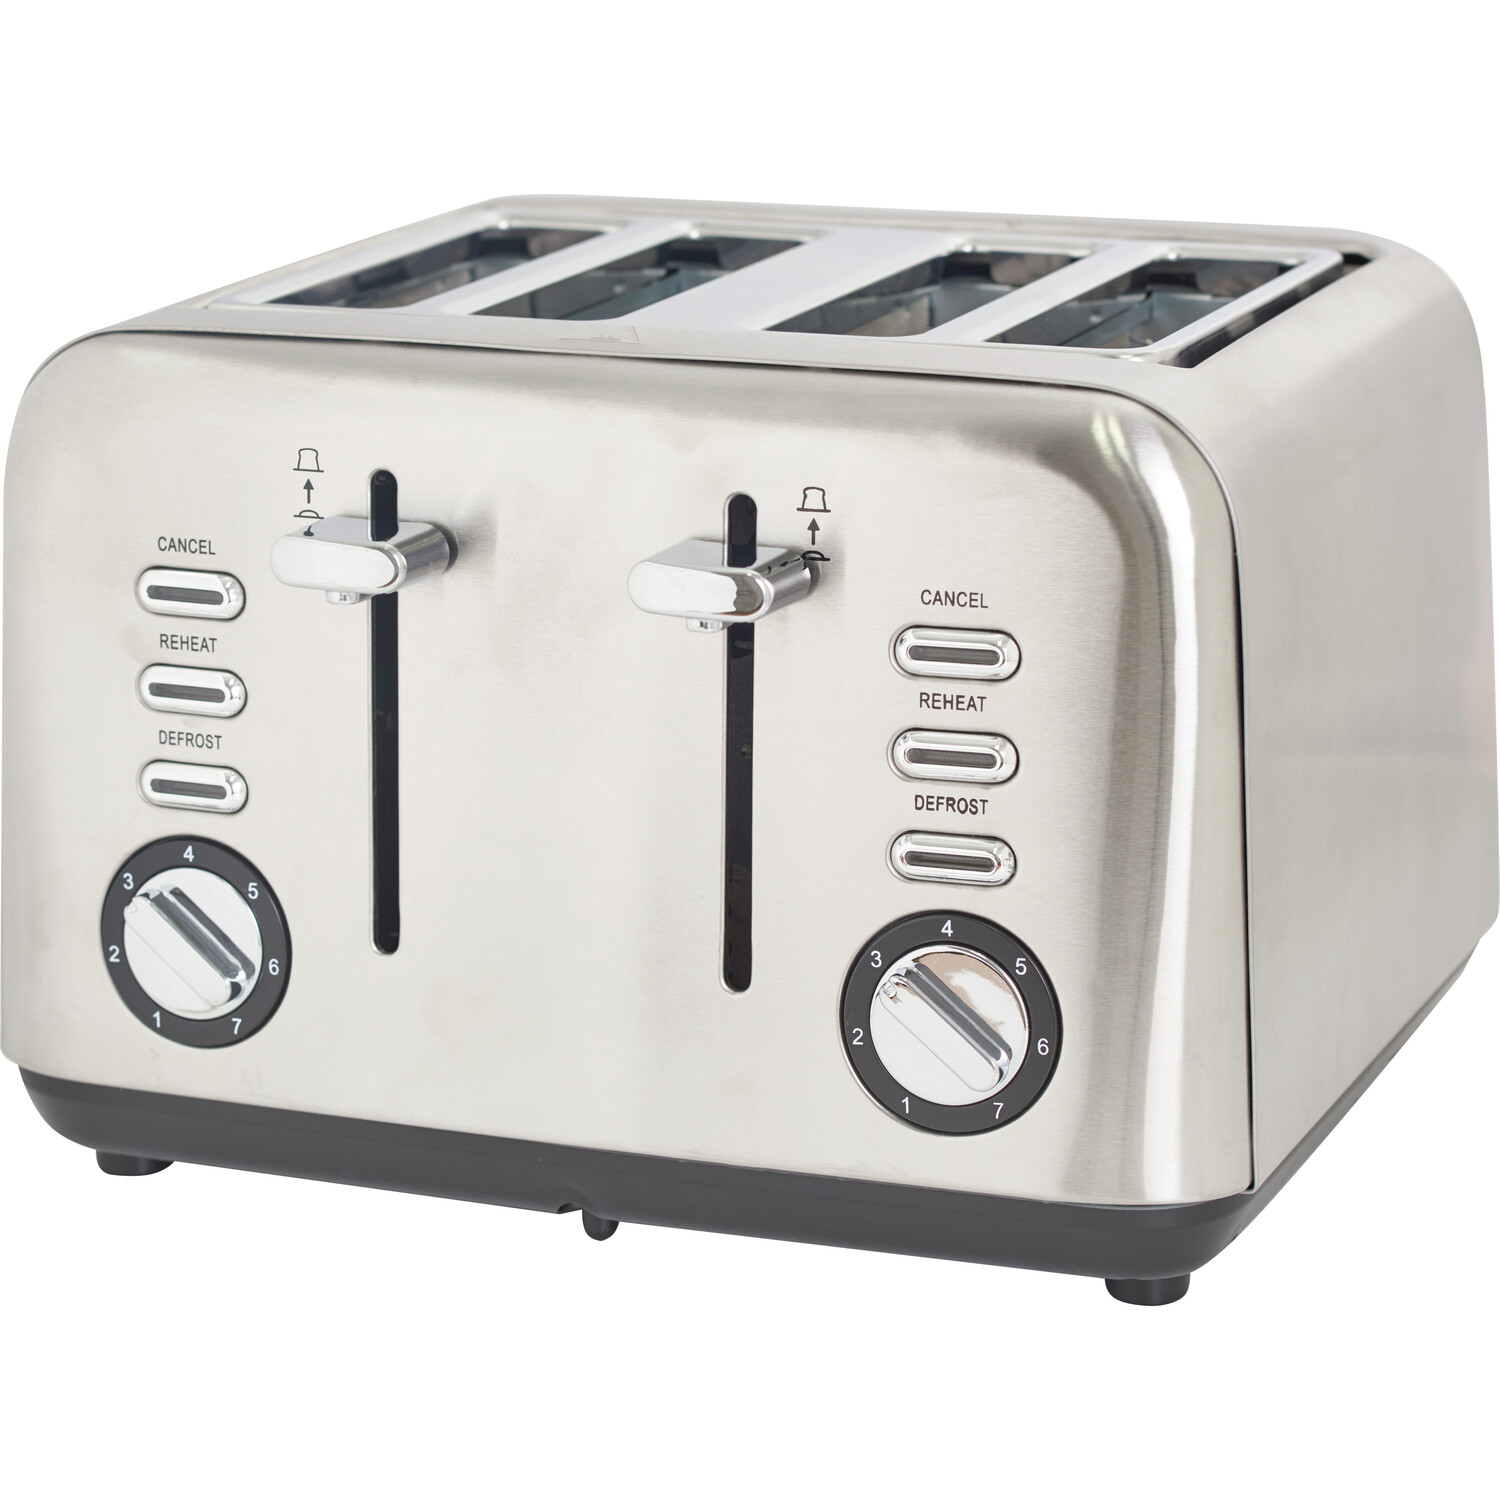 MY Silver 4 Slice Stainless Steel Toaster Image 1